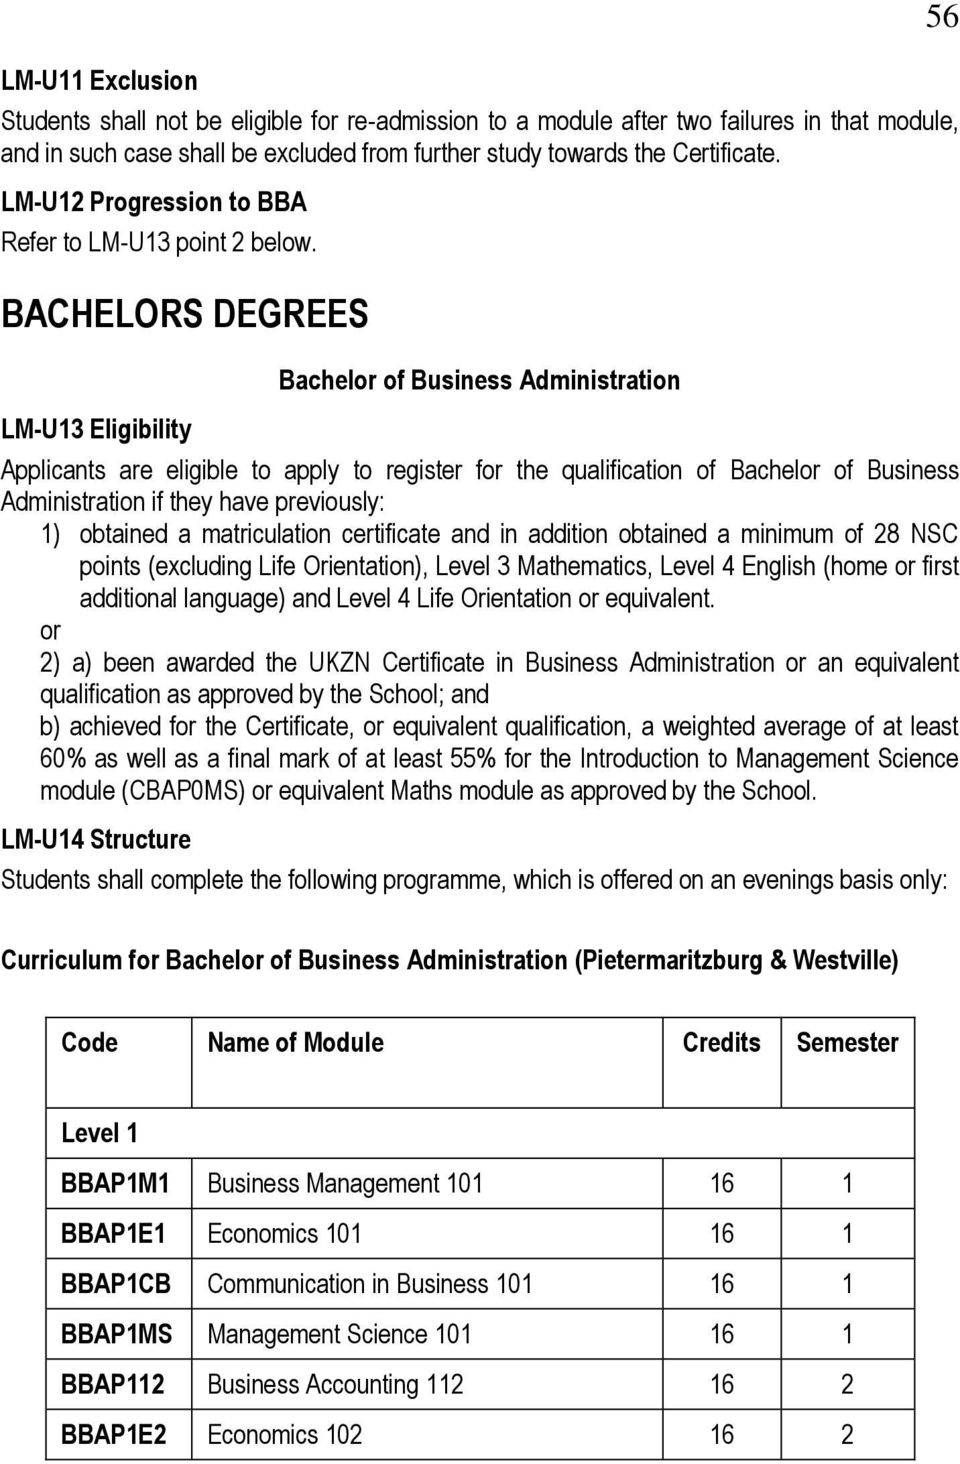 BACHELORS DEGREES LM-U13 Eligibility Bachel of Business Administration Applicants are eligible to apply to register f the qualification of Bachel of Business Administration if they have previously: